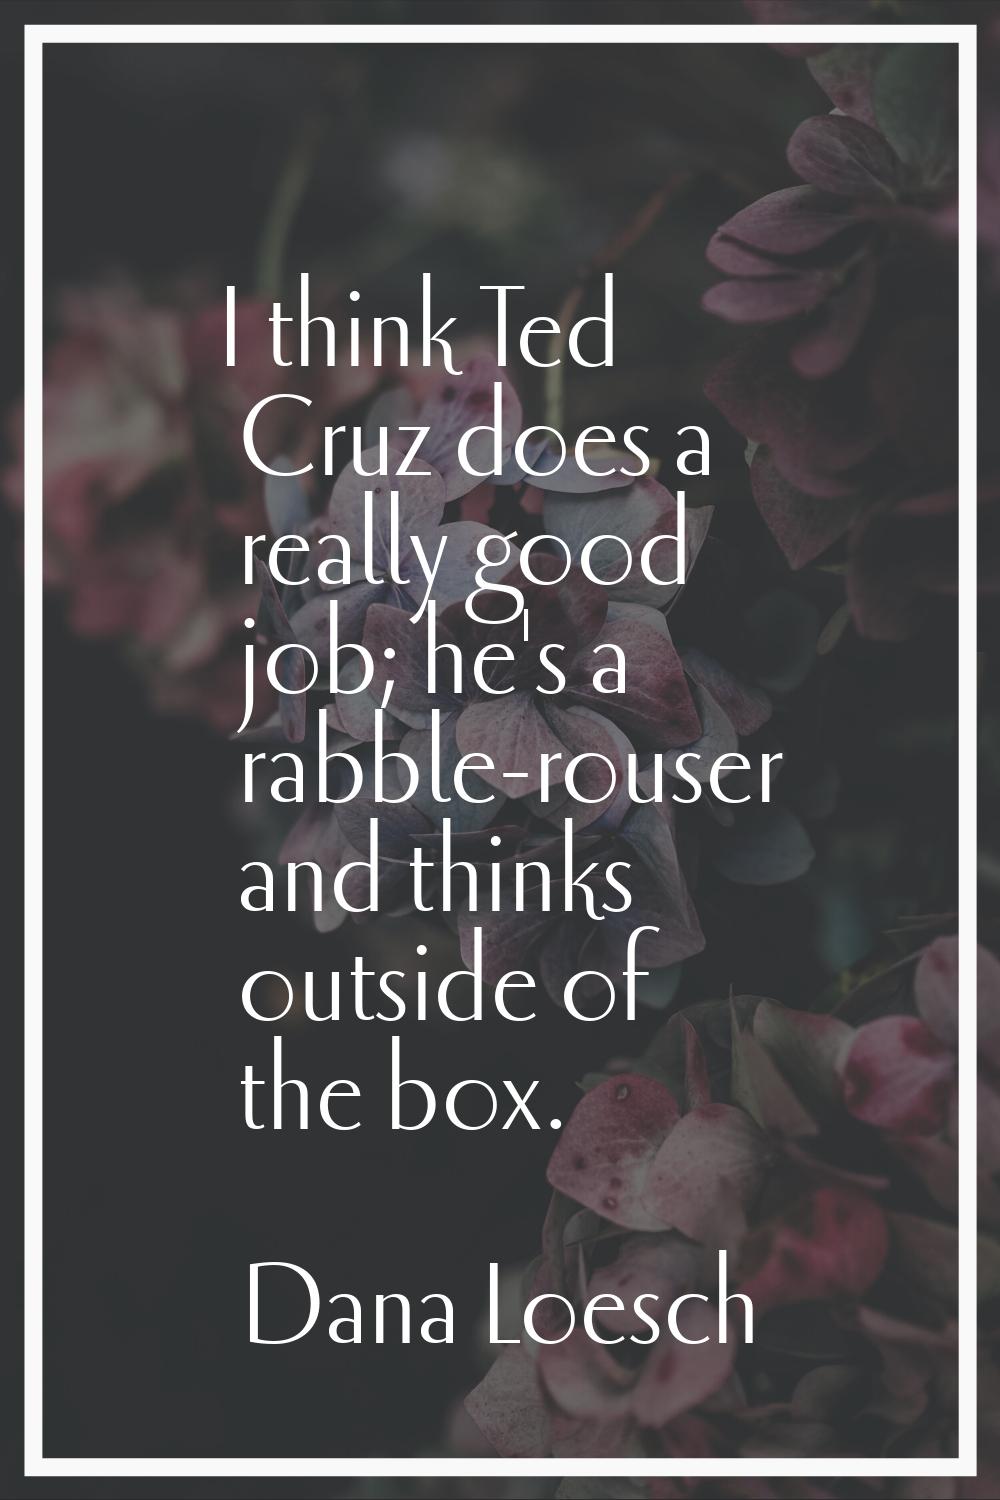 I think Ted Cruz does a really good job; he's a rabble-rouser and thinks outside of the box.